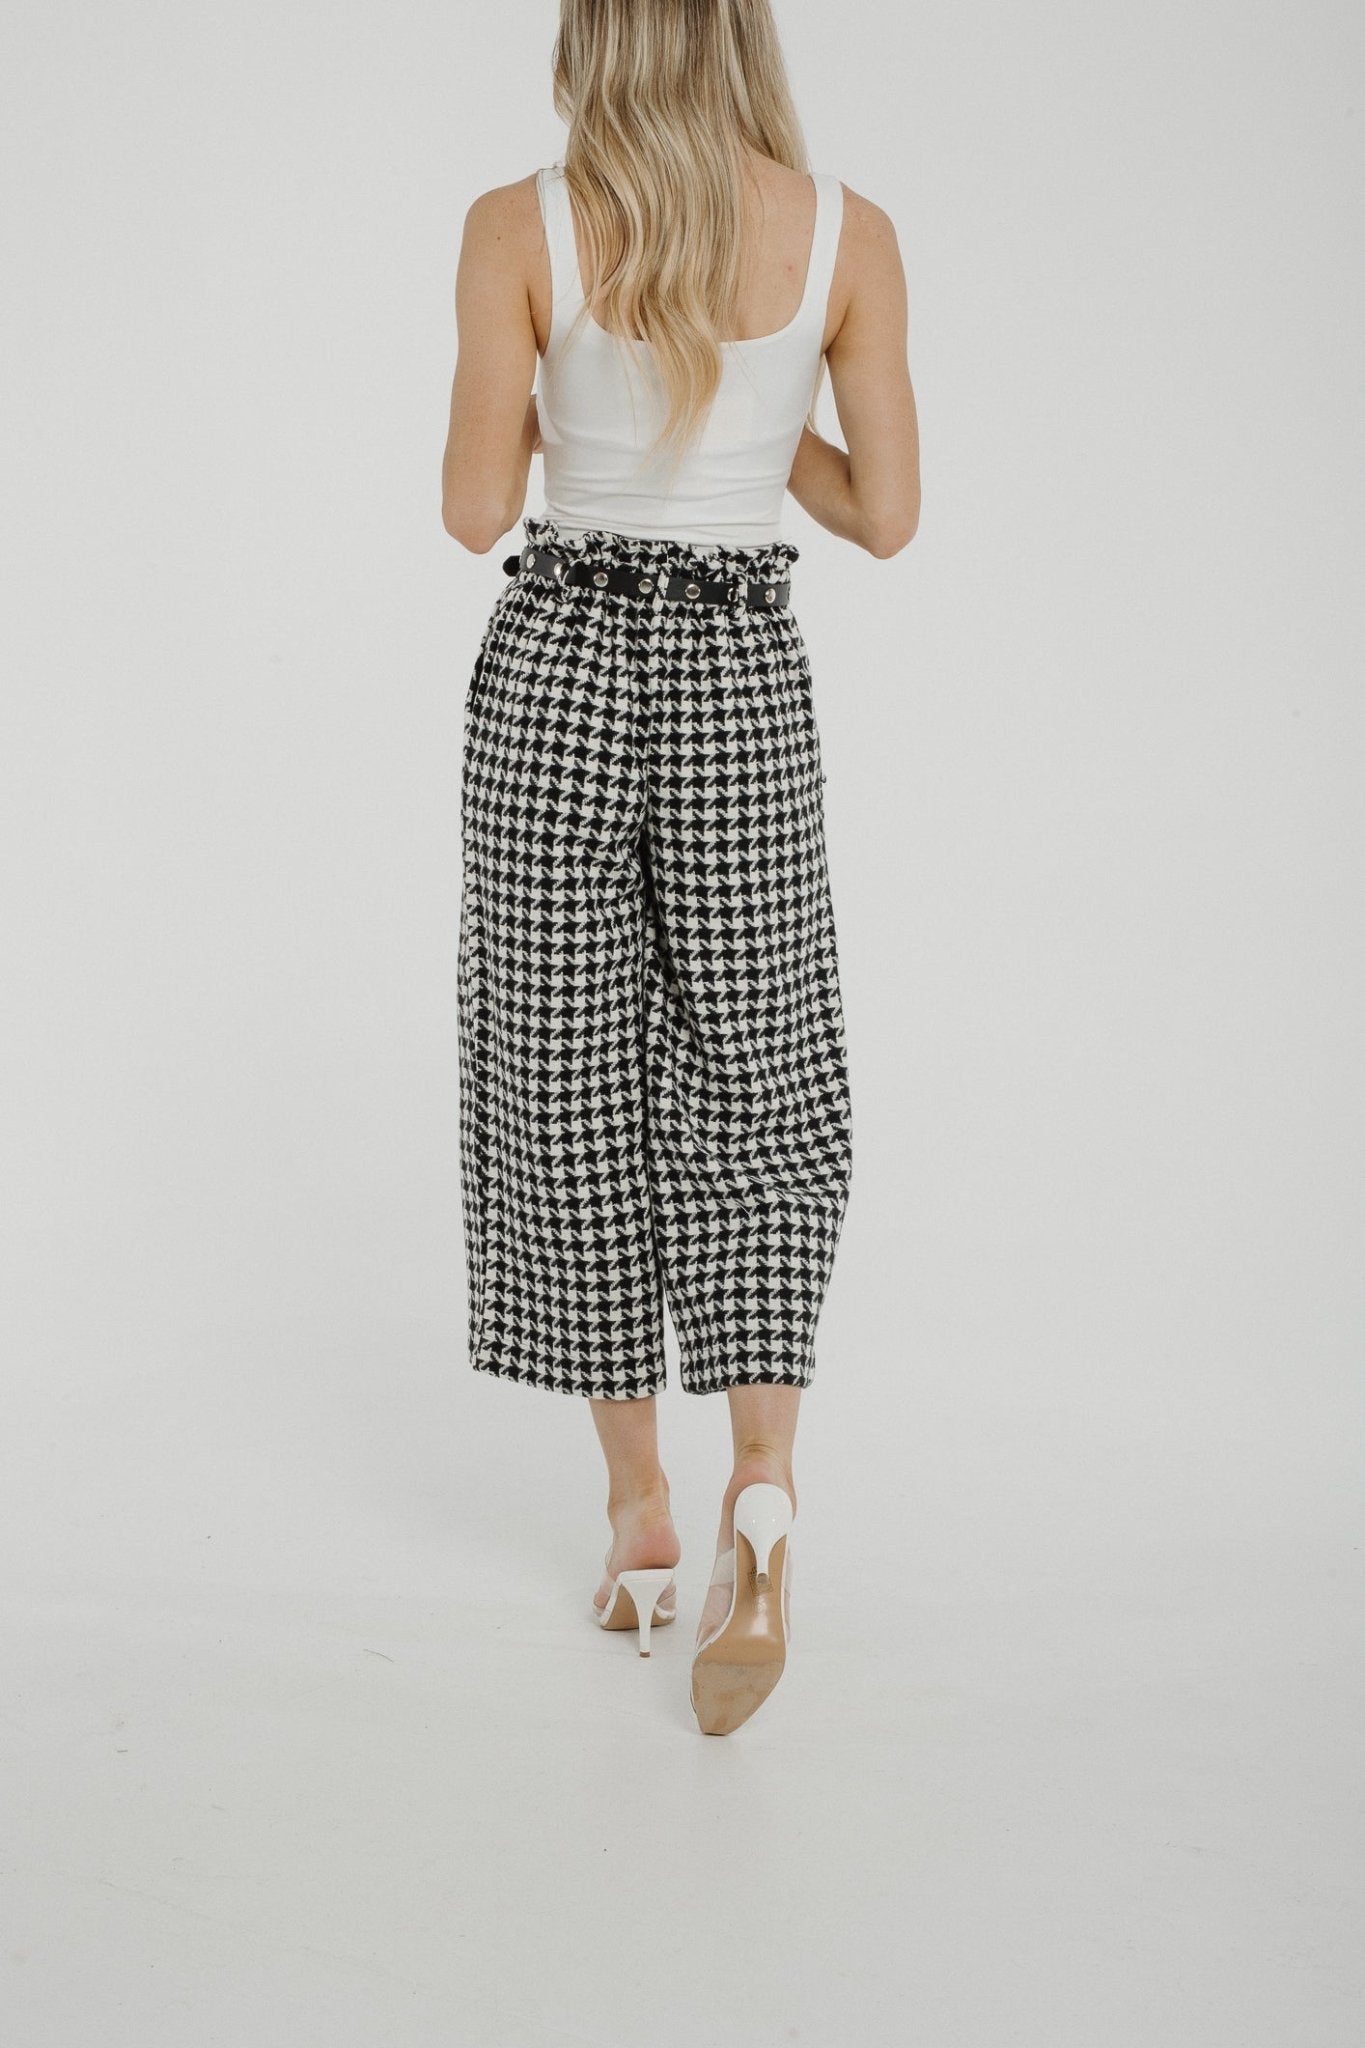 Becca Houndstooth Culottes In Black & White - The Walk in Wardrobe